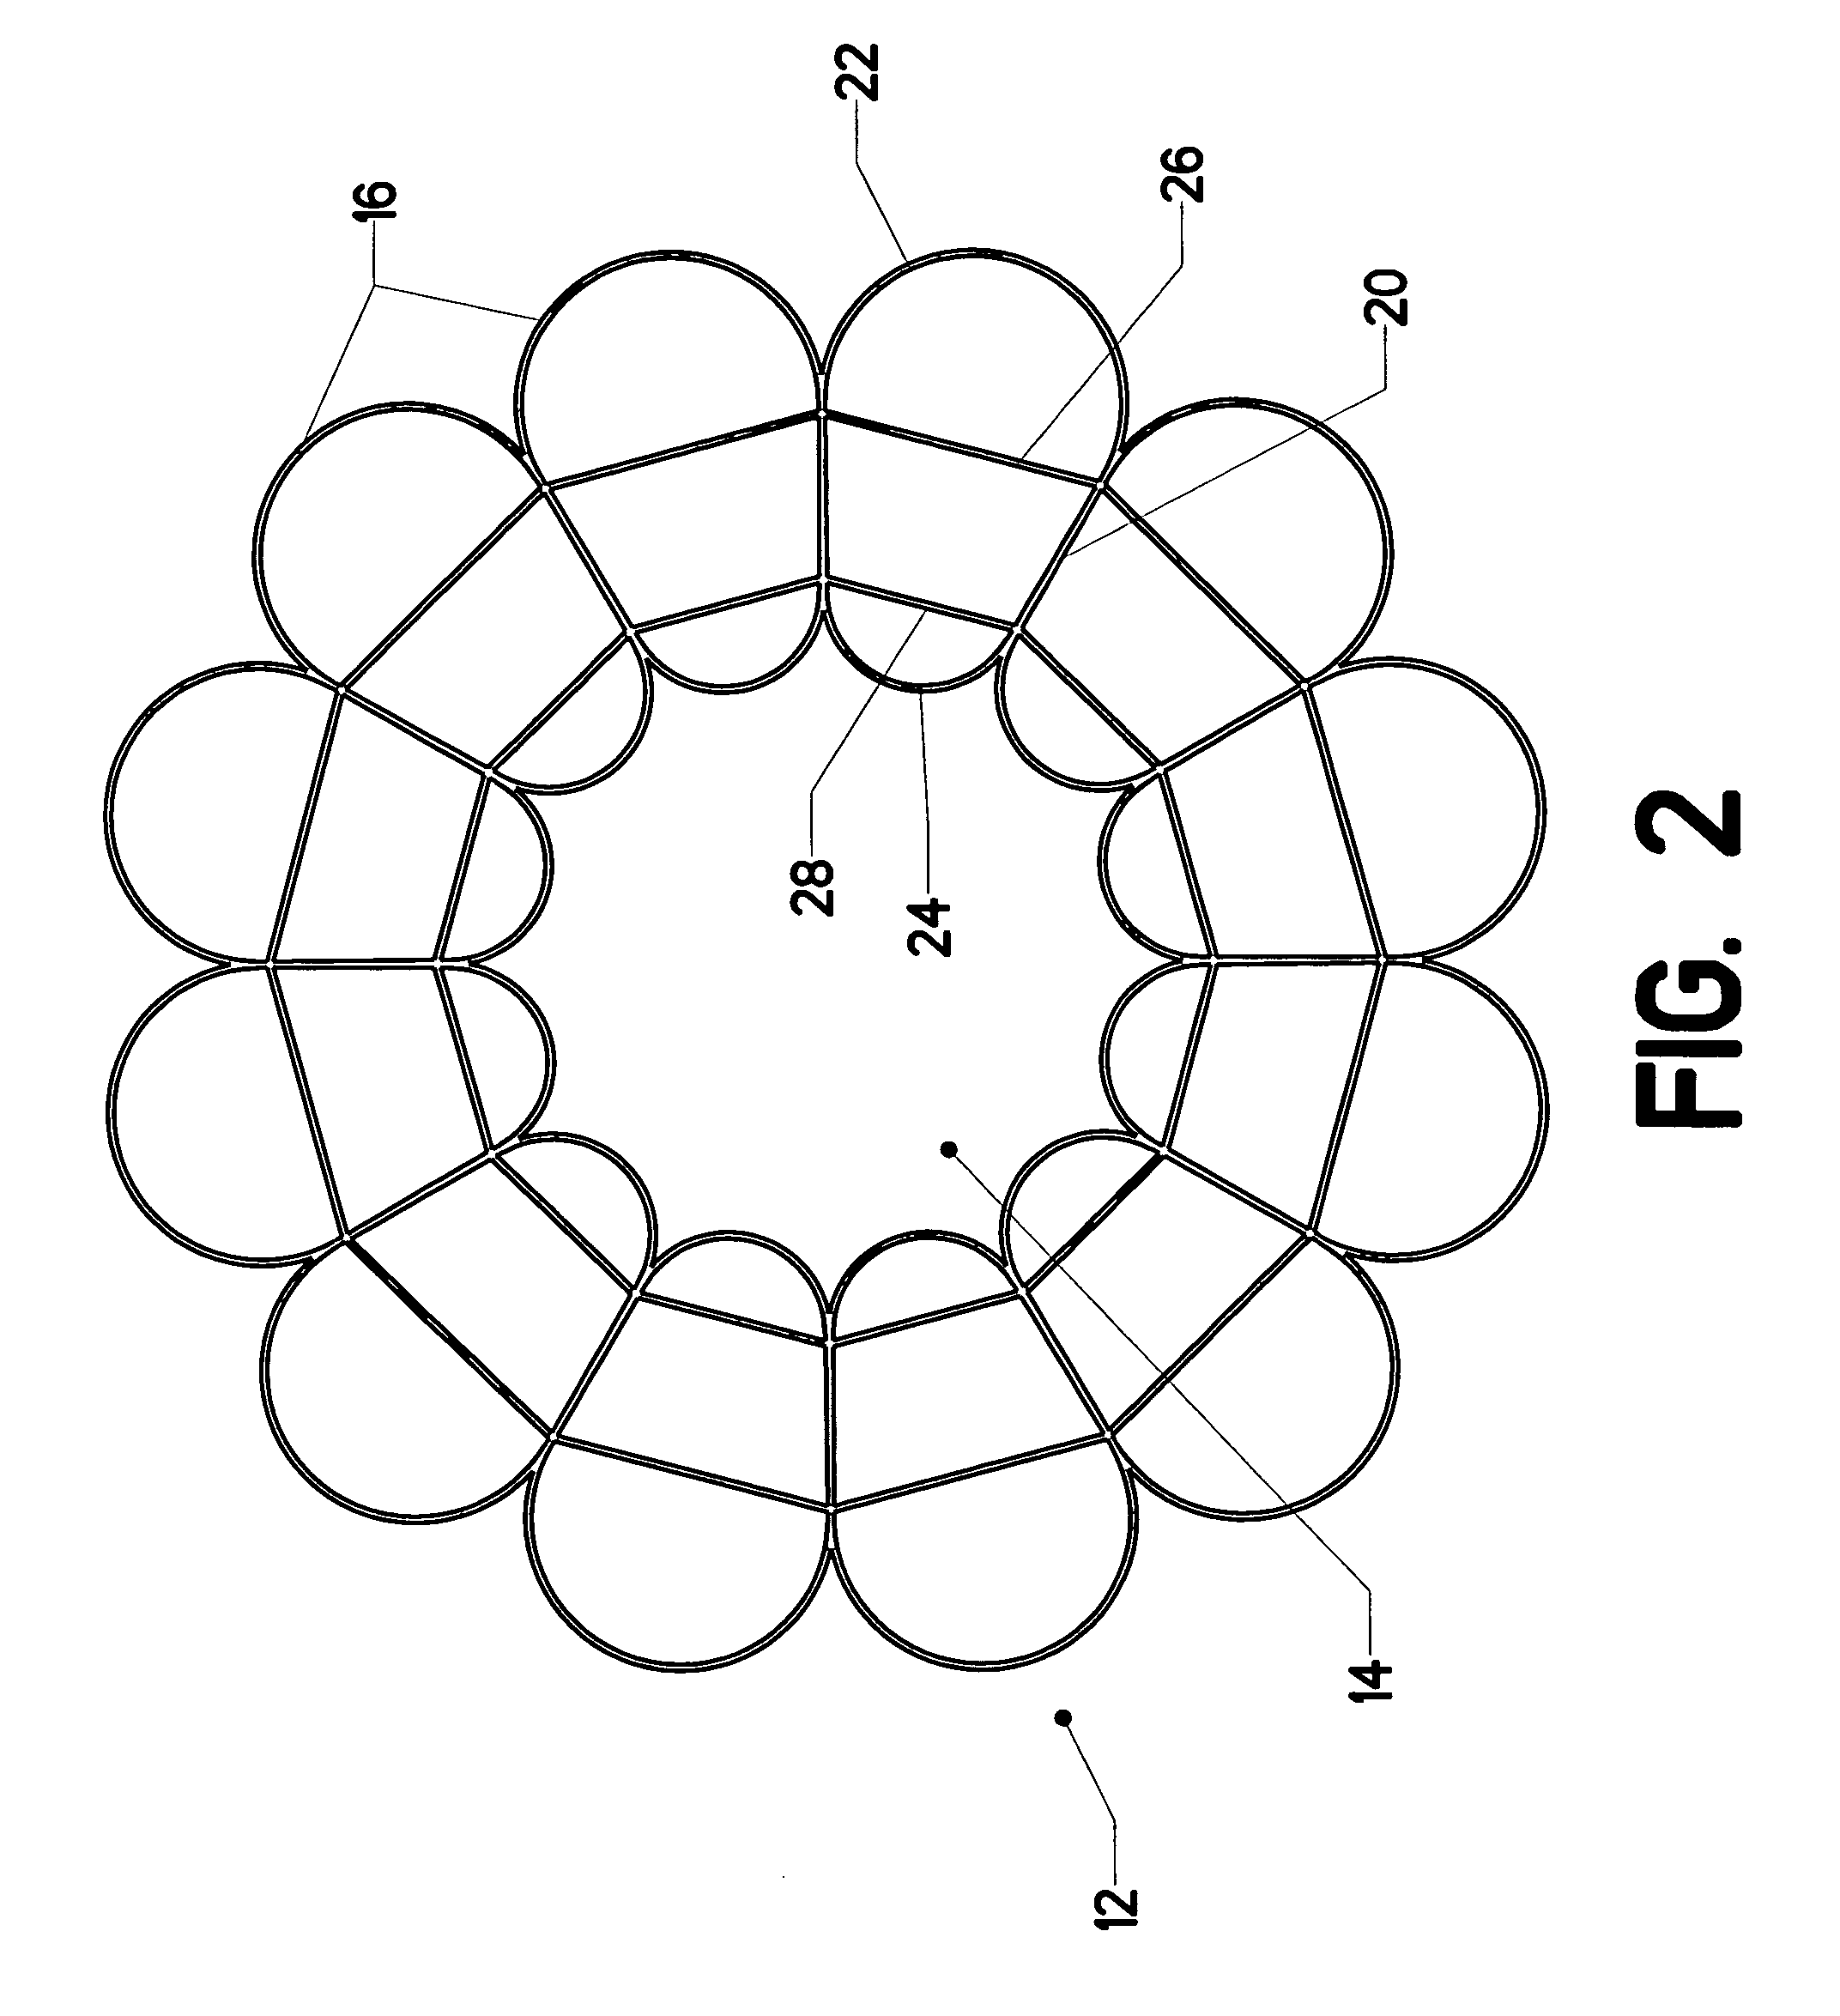 Light-weight vacuum chamber and applications thereof